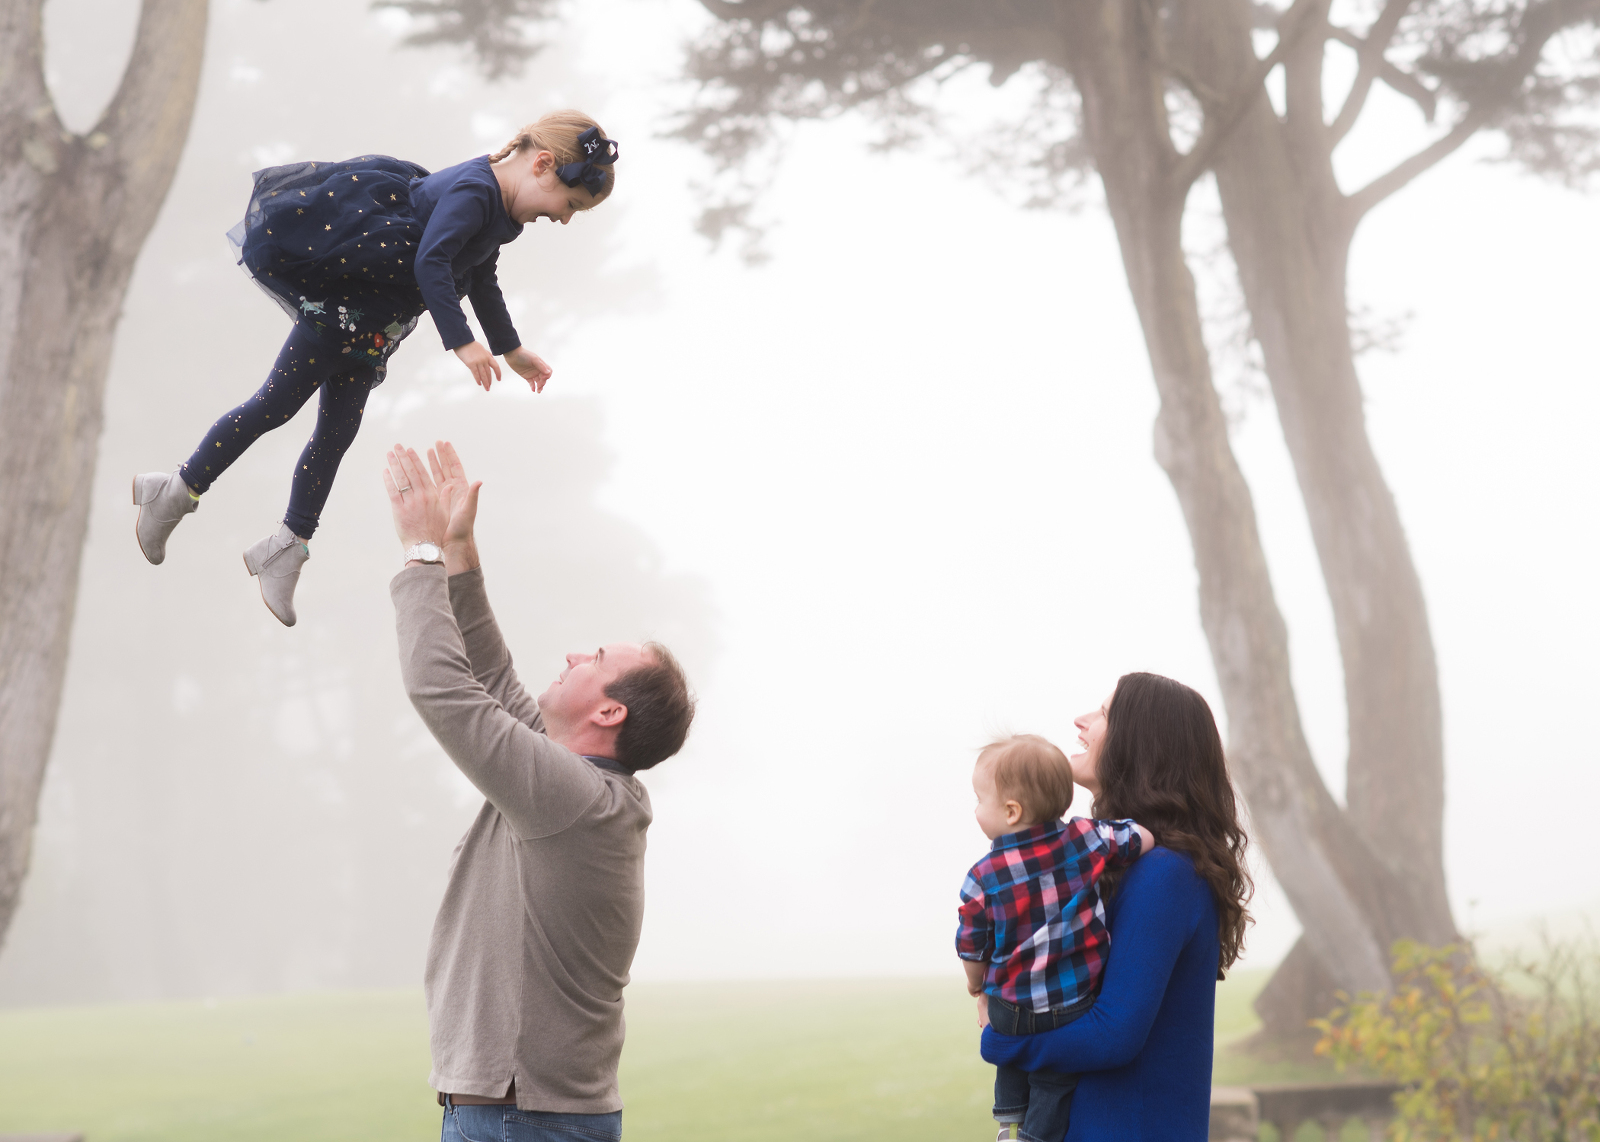 dad catching his daughter with mom and baby brother looking on, foggy San Francisco scene